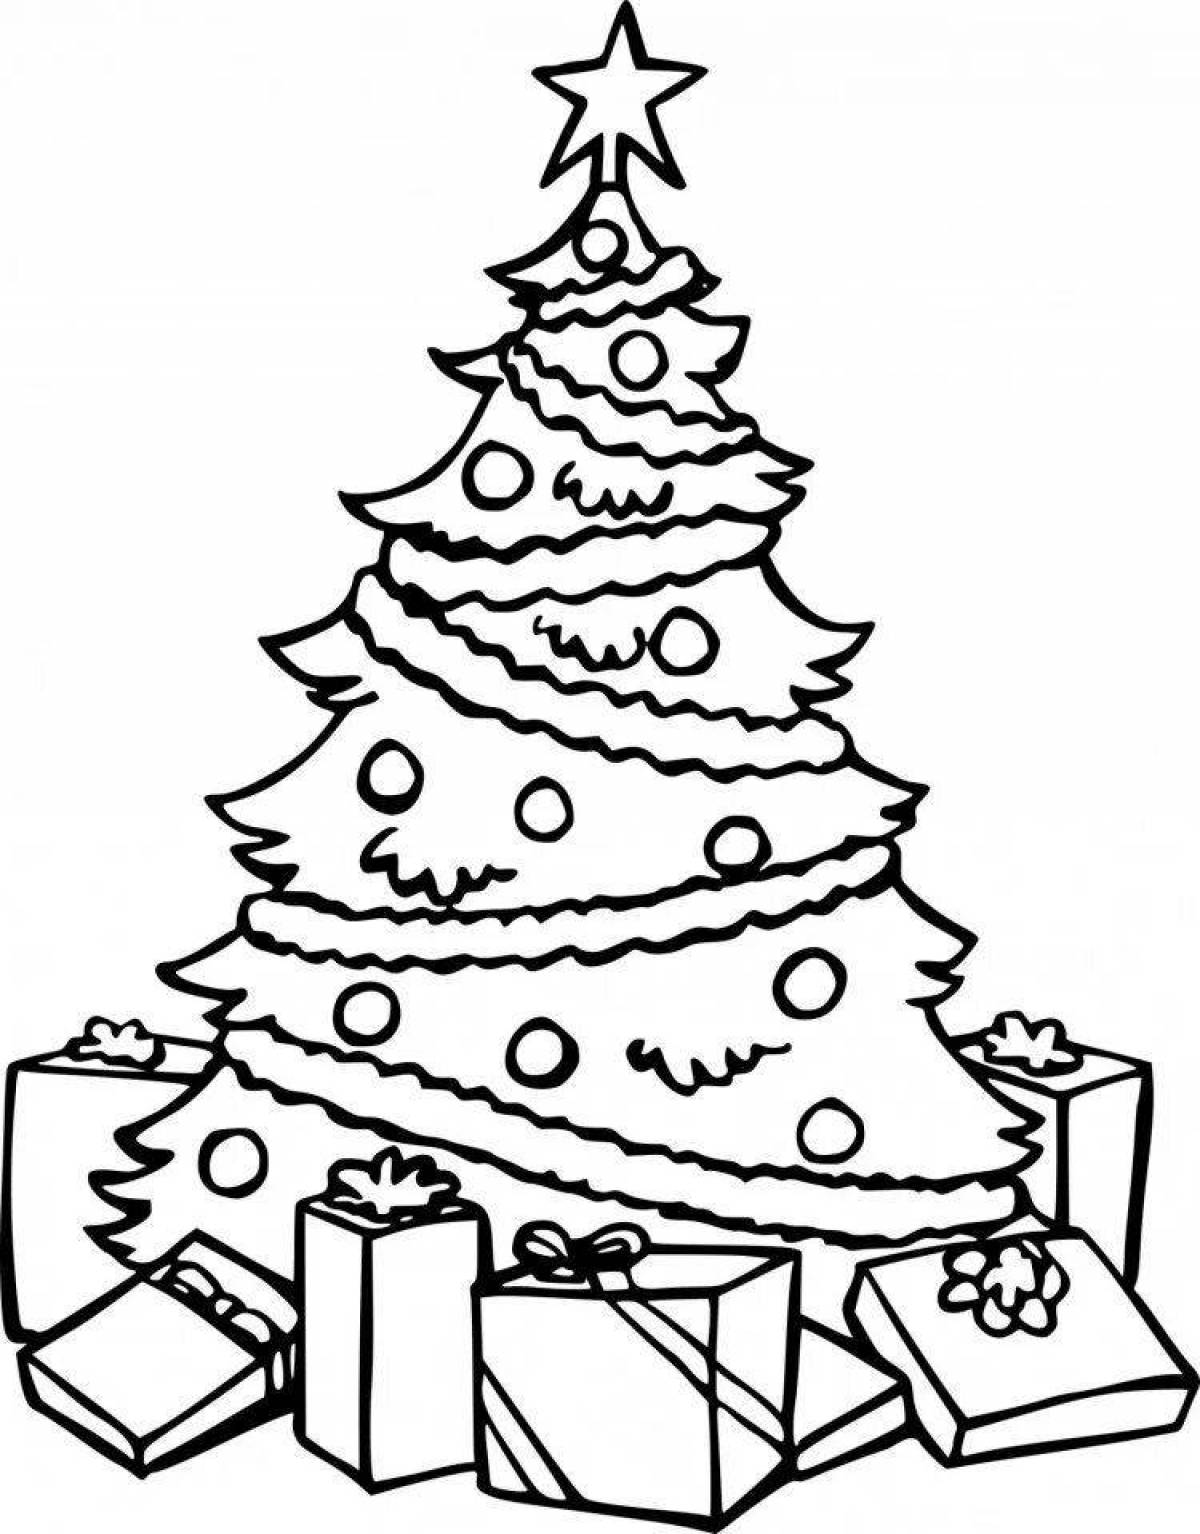 Christmas tree with gifts #5